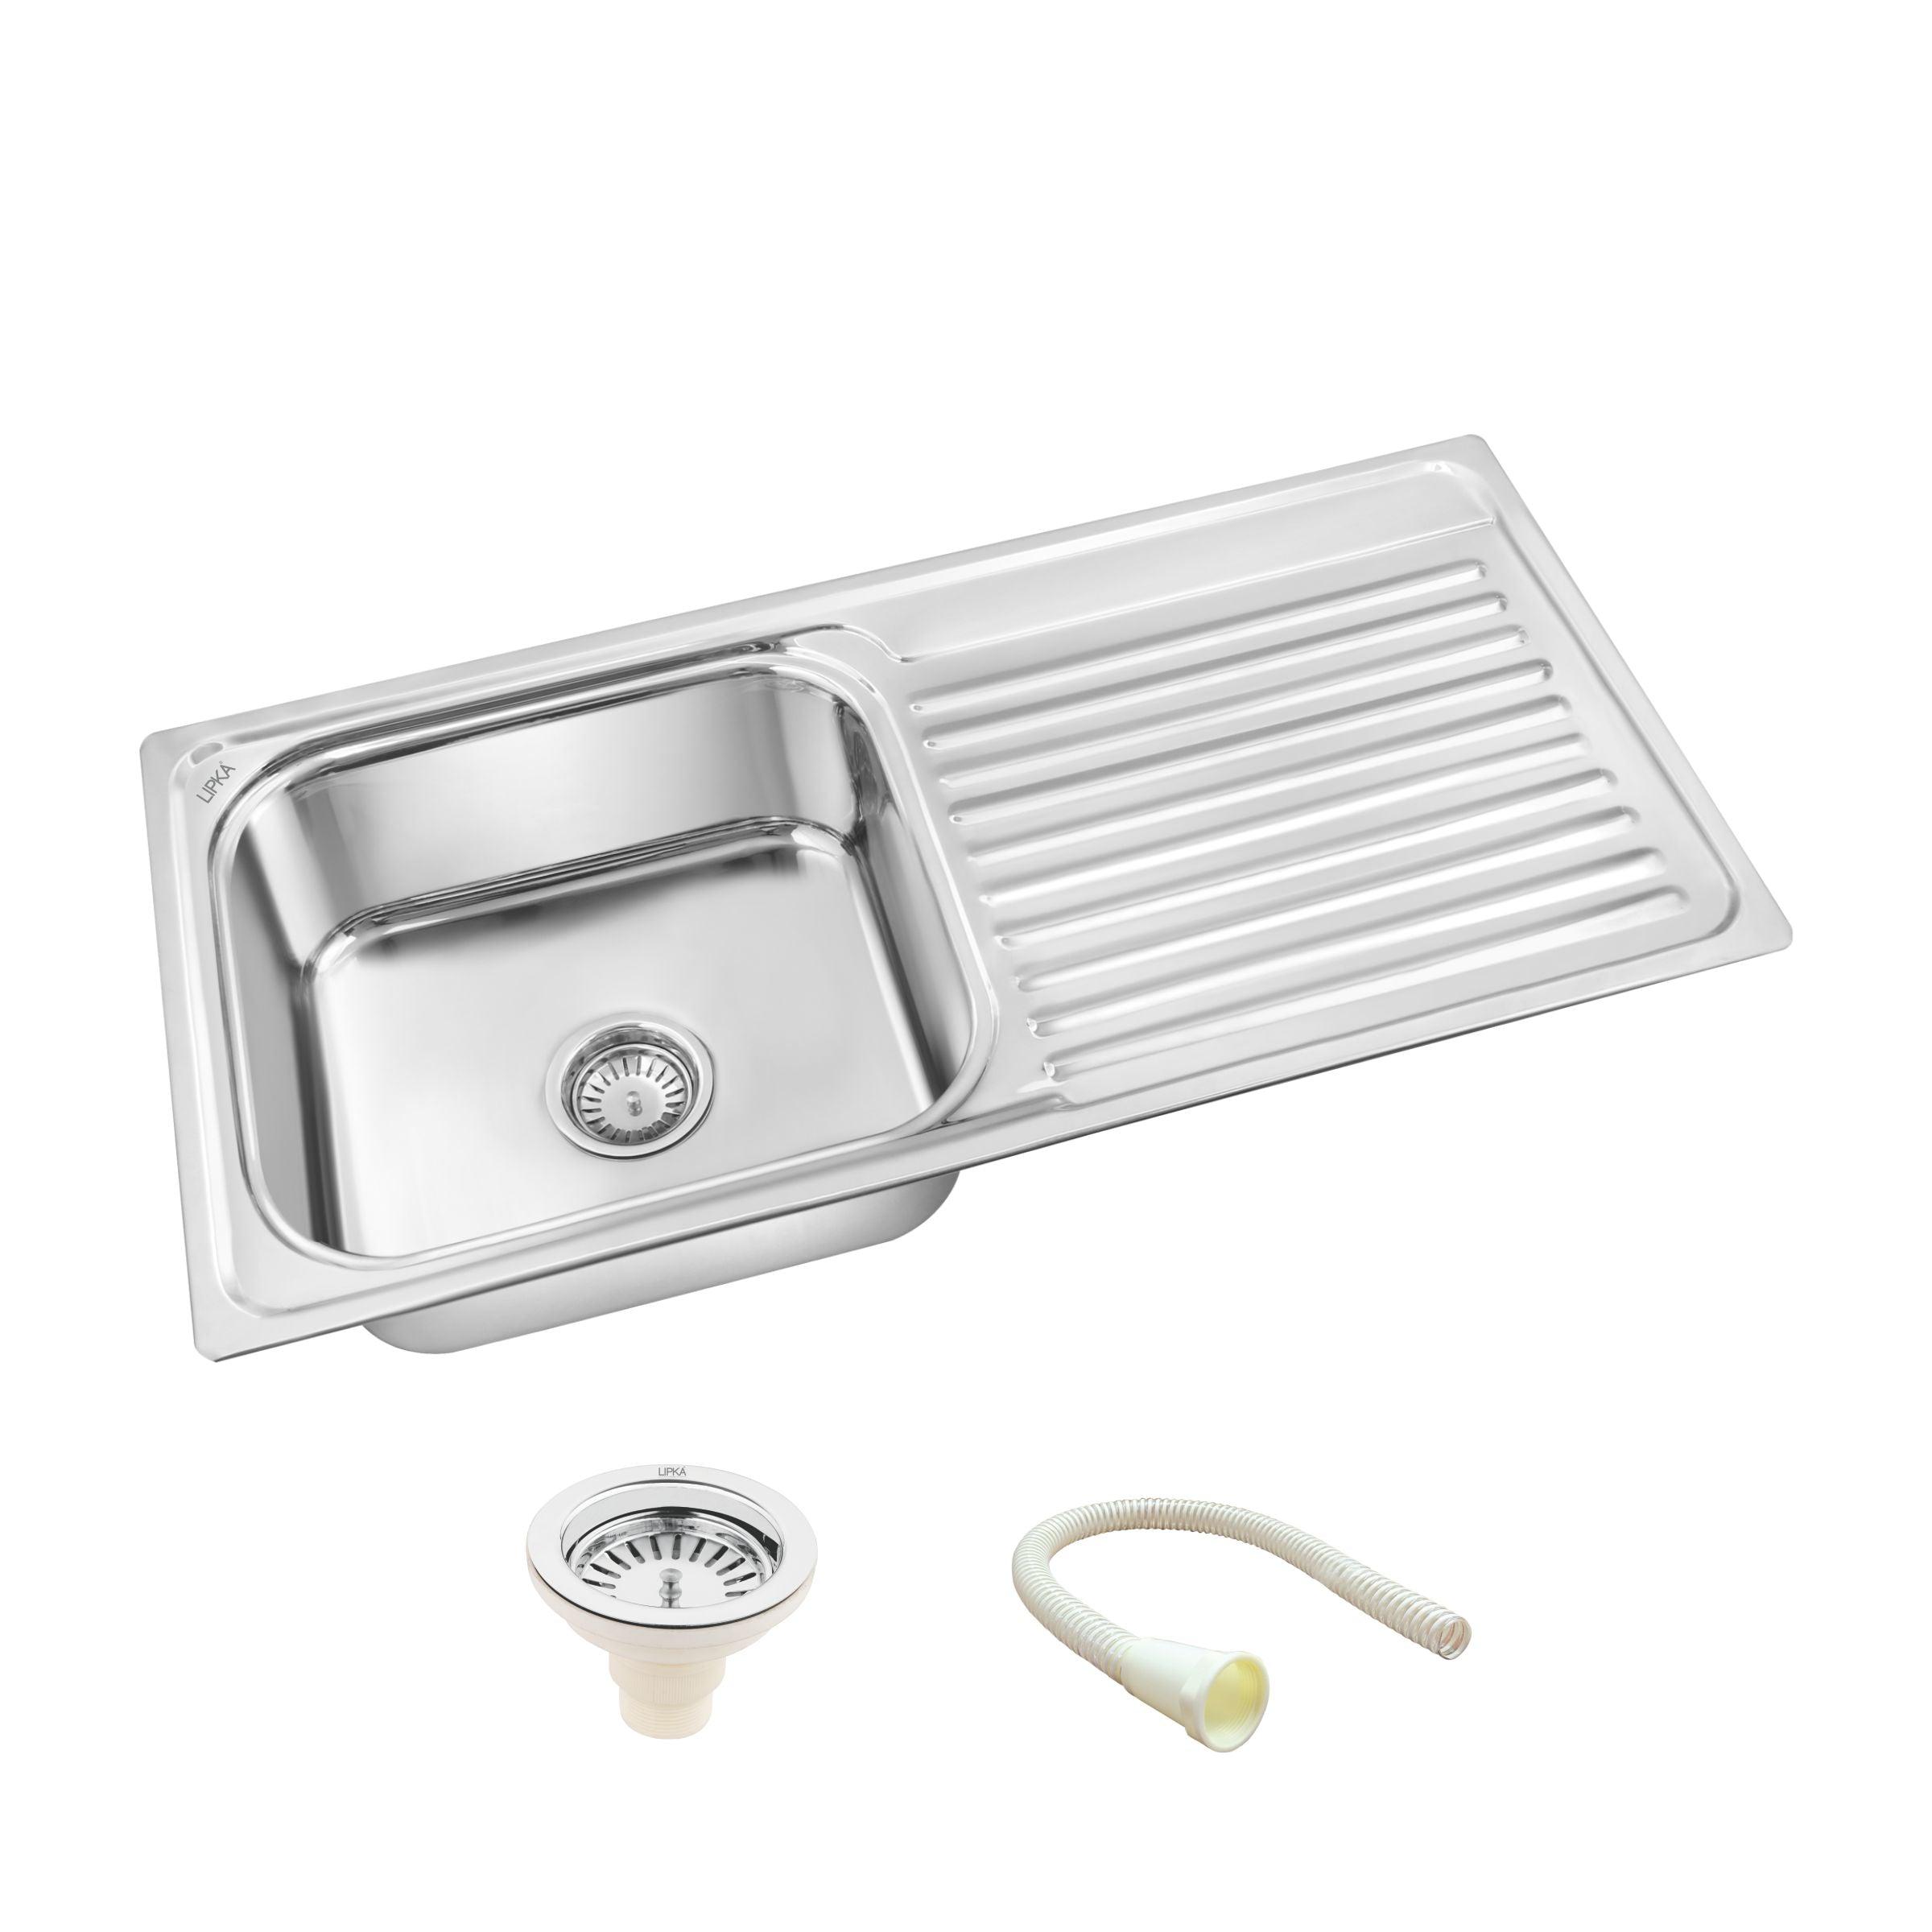 Square Single Bowl 304-Grade Kitchen Sink with Drainboard (37 x 18 x 8 Inches) - LIPKA